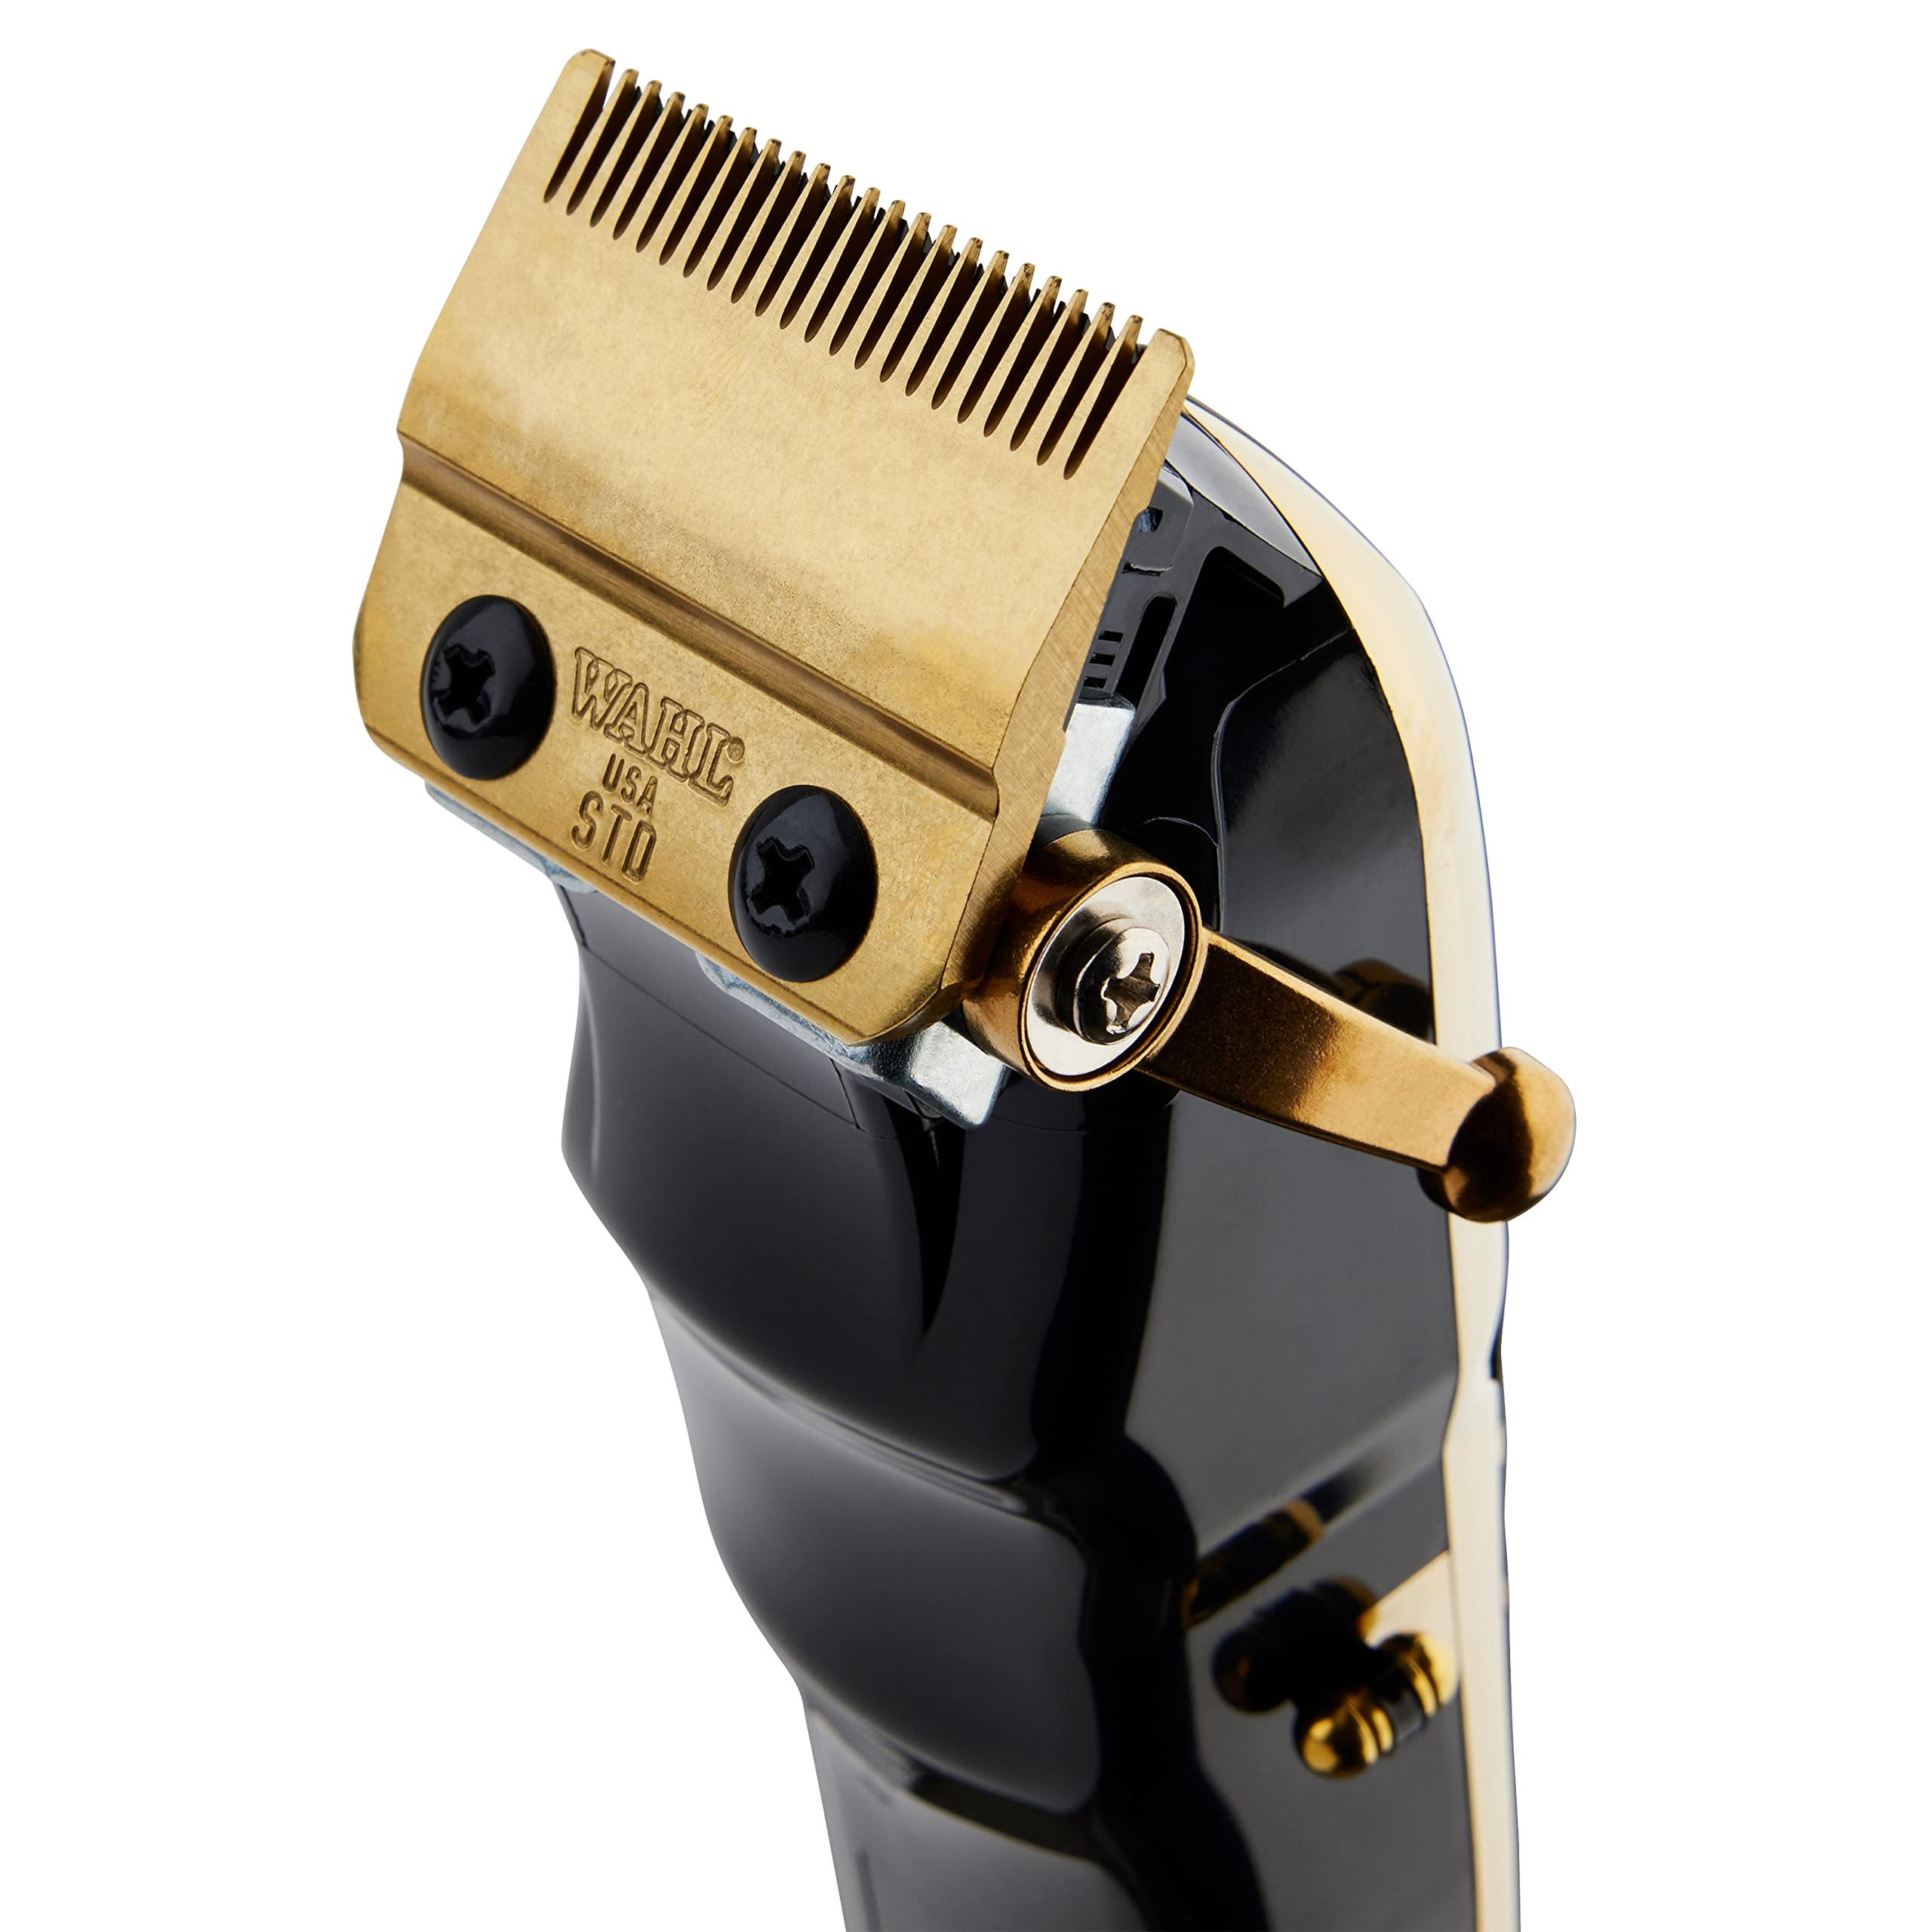 Wahl Professional 5 Star Gold Cordless Magic Clip Hair Clipper & Wahl Professional Large Styling Dark Grey Comb Bundle